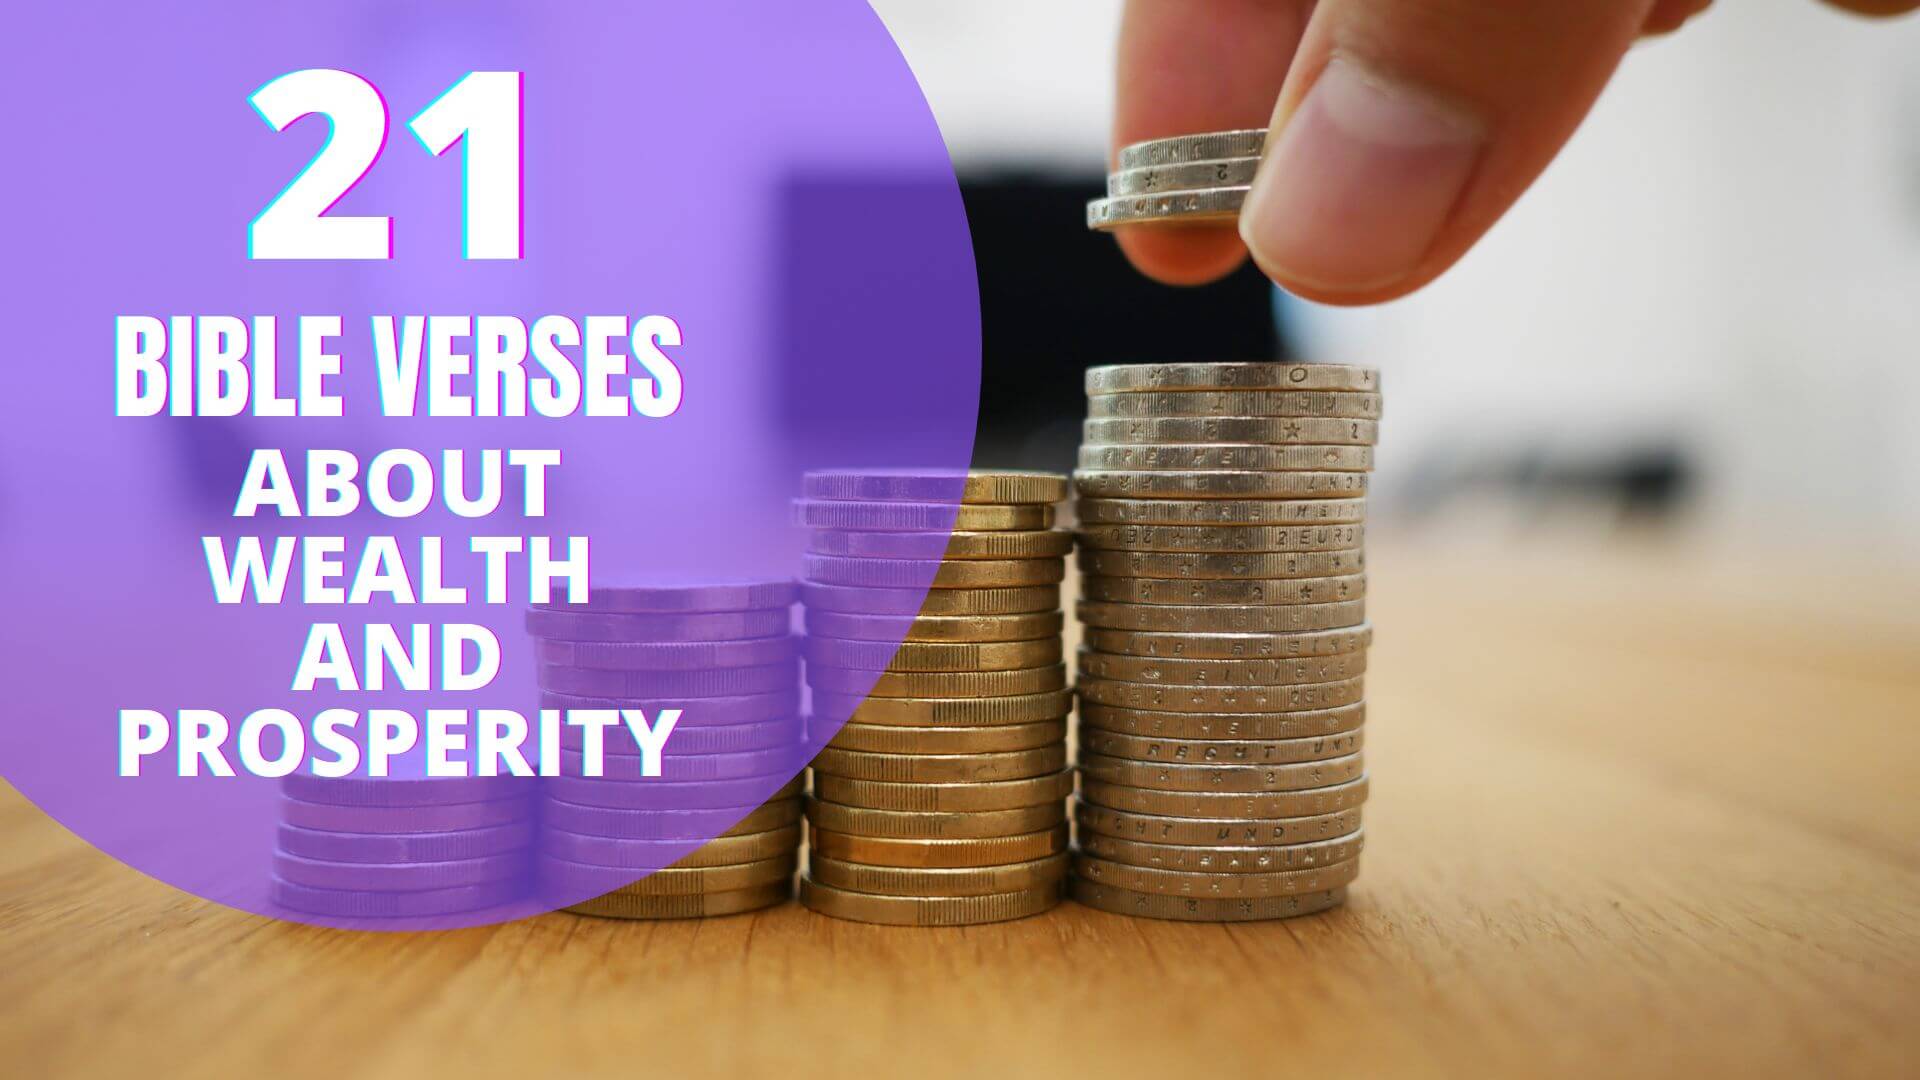 Bible Verses About Wealth And Prosperity